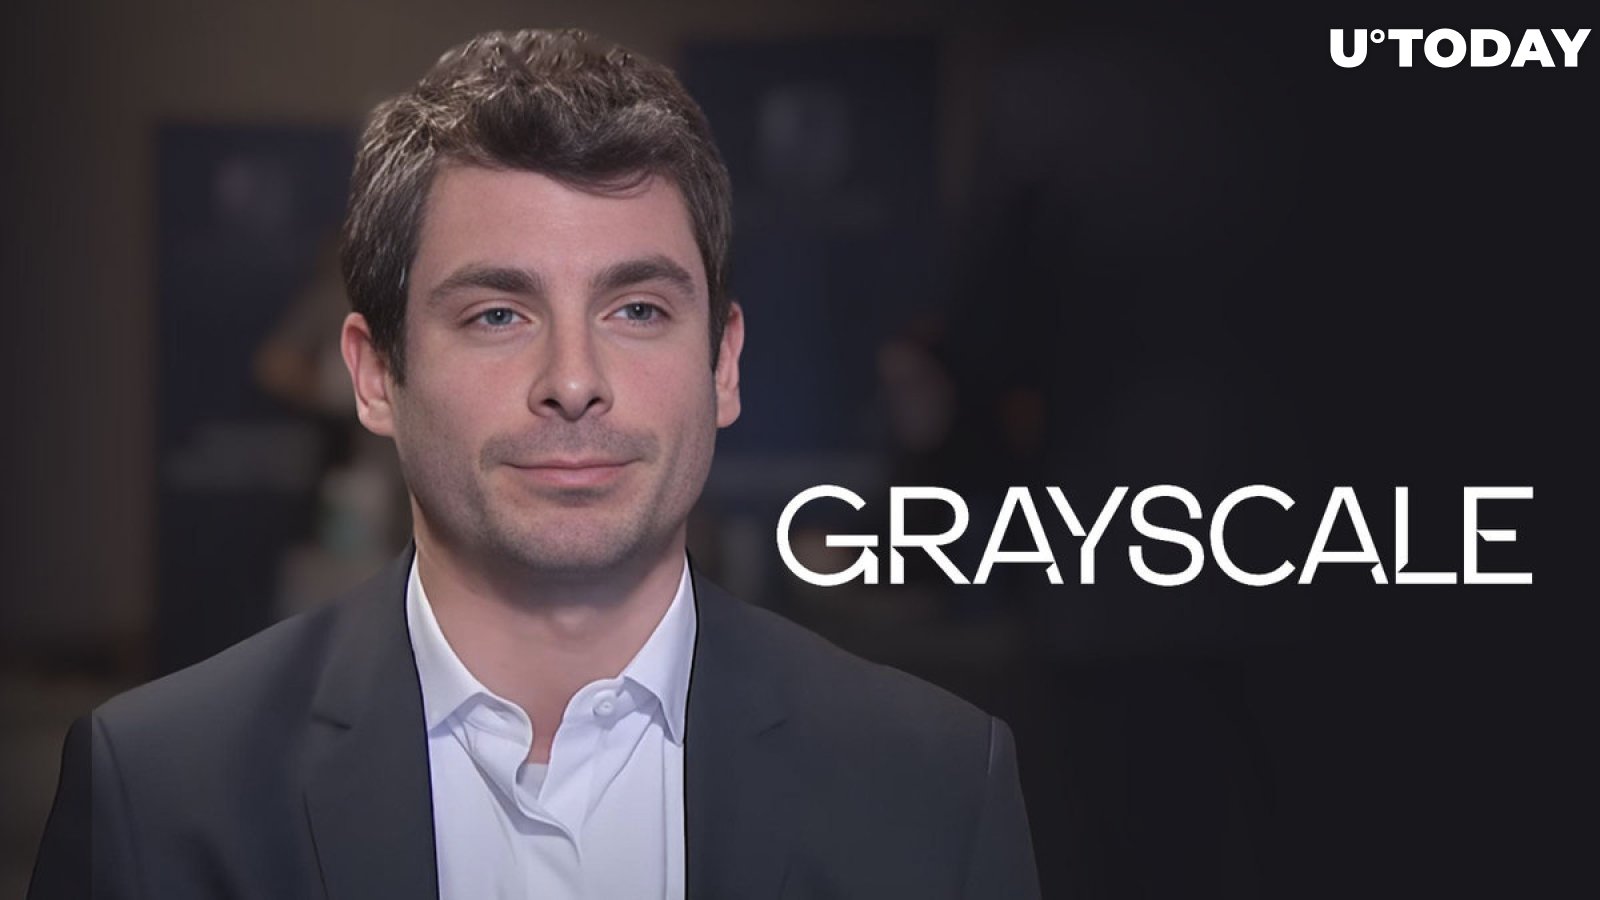 Grayscale CLO Excites Crypto Community With Intriguing Tweet